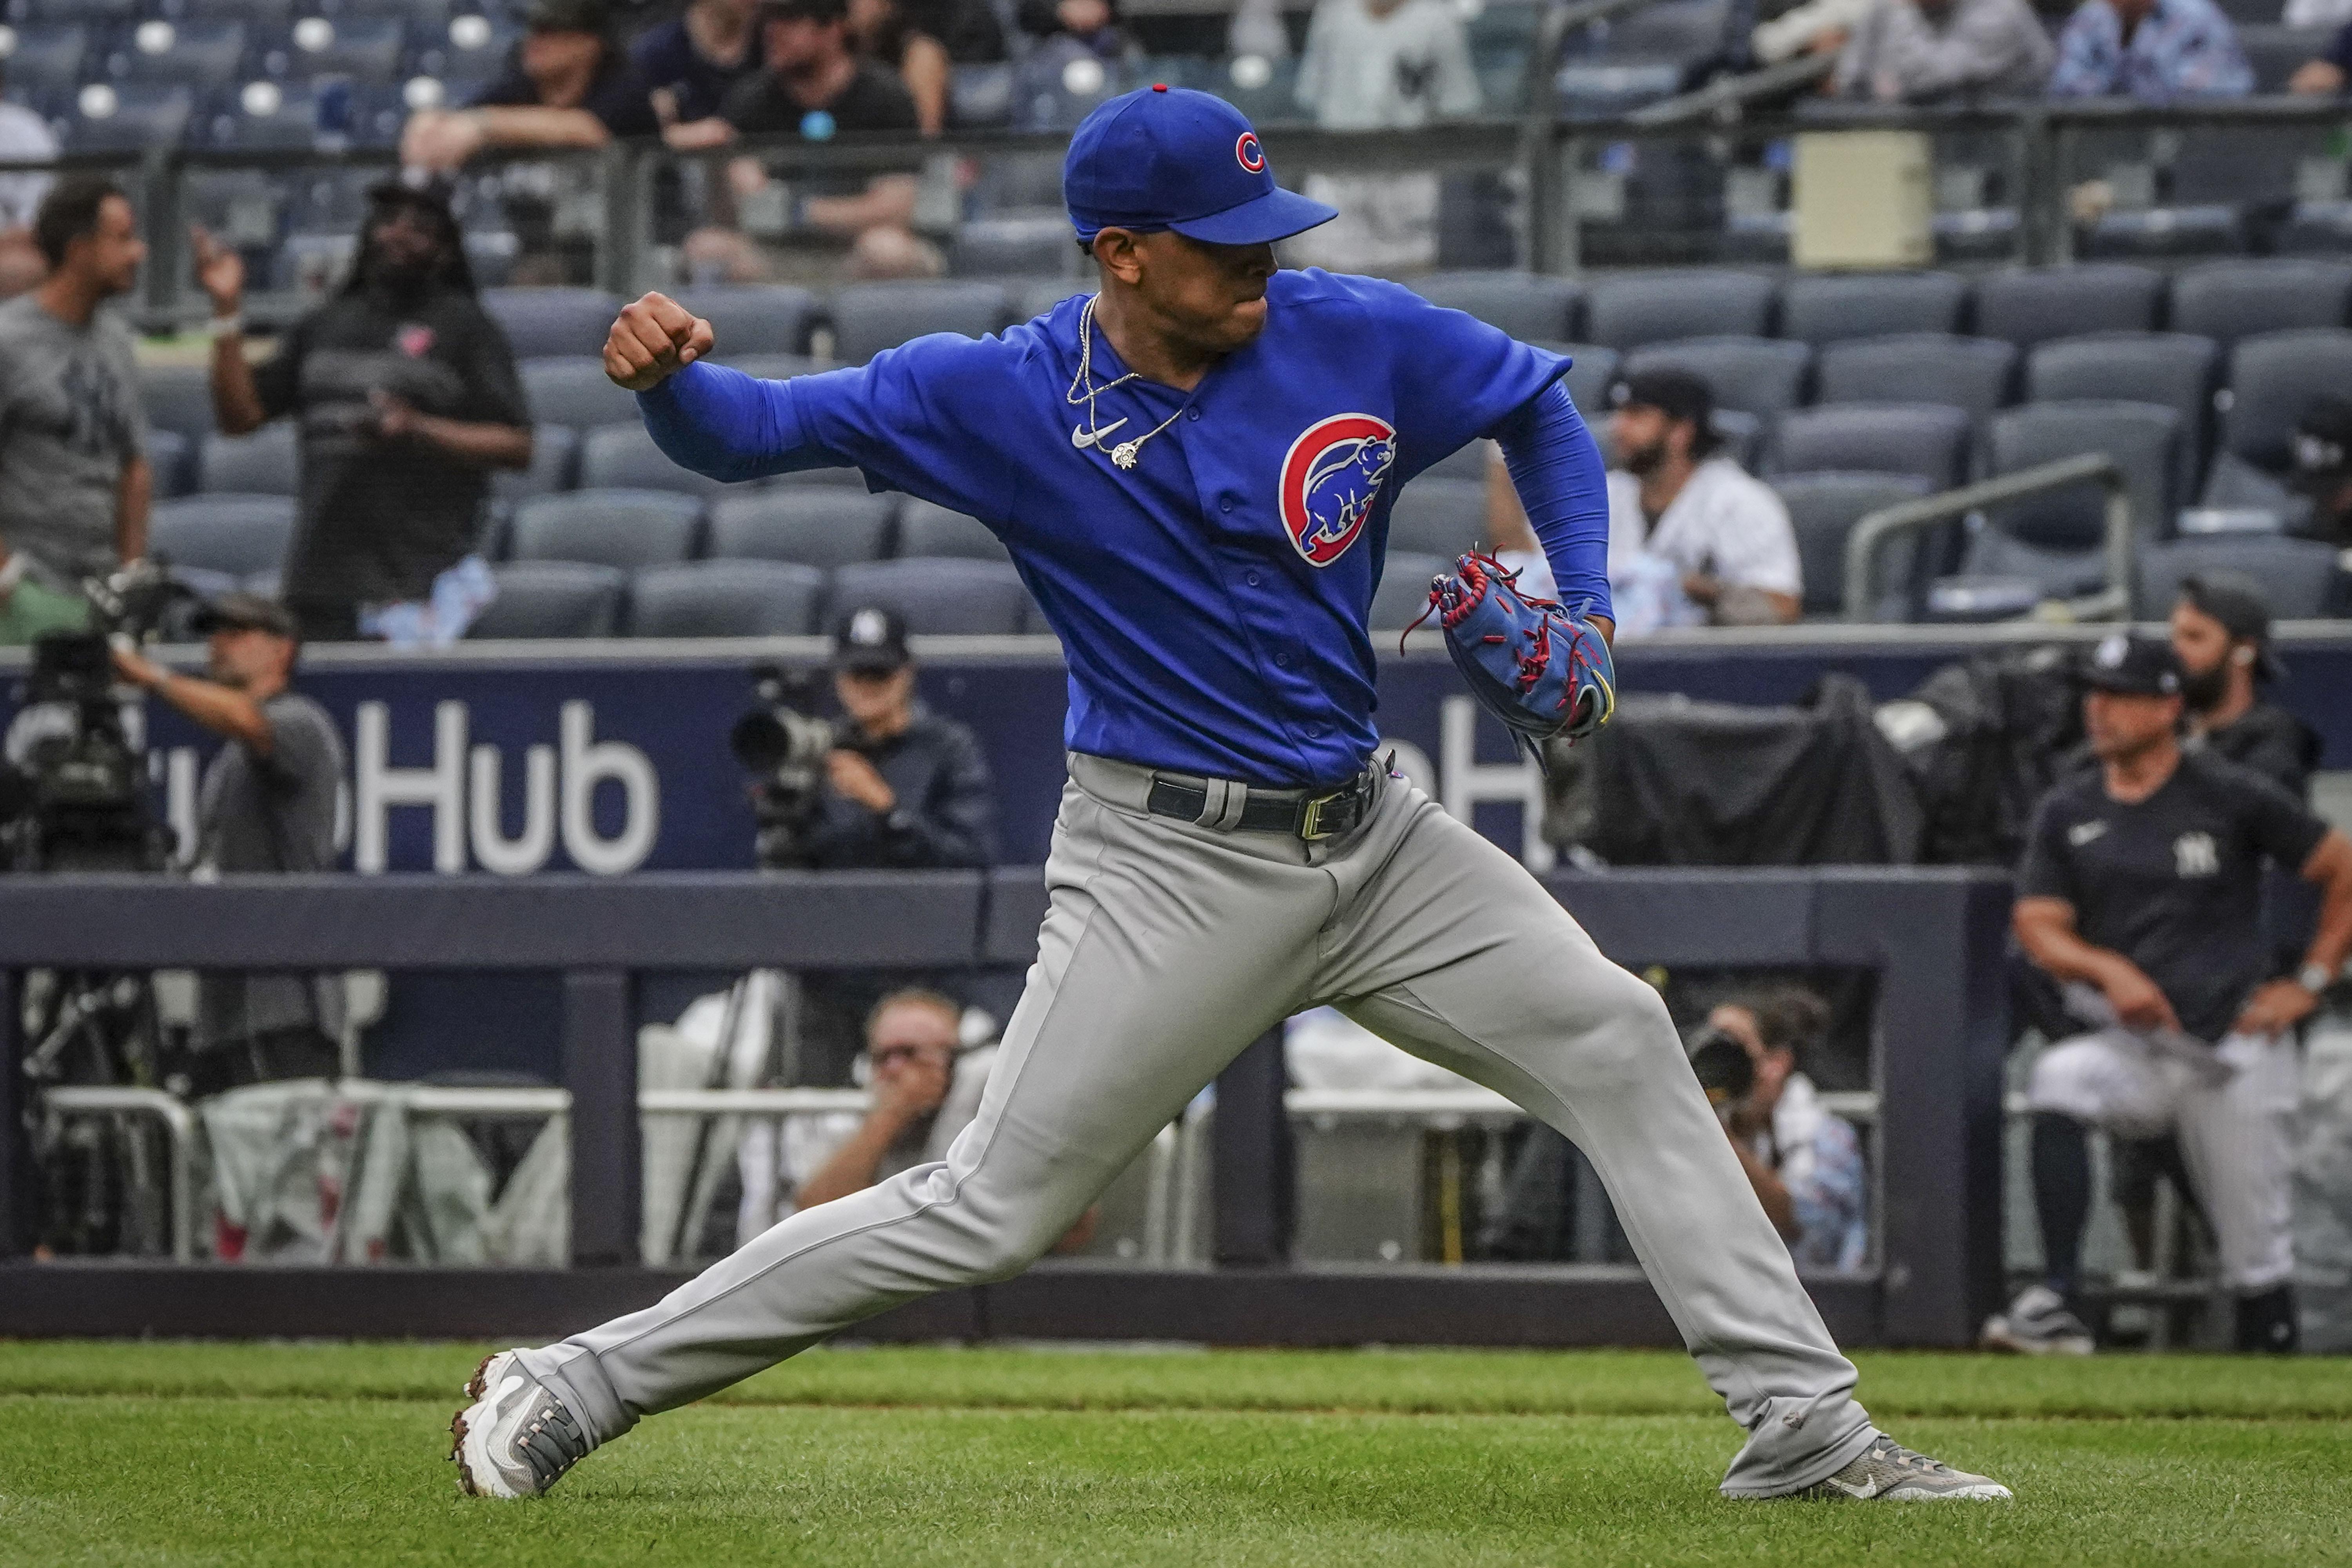 Chicago Cubs score 6 runs late to rally for 7-4 win over New York